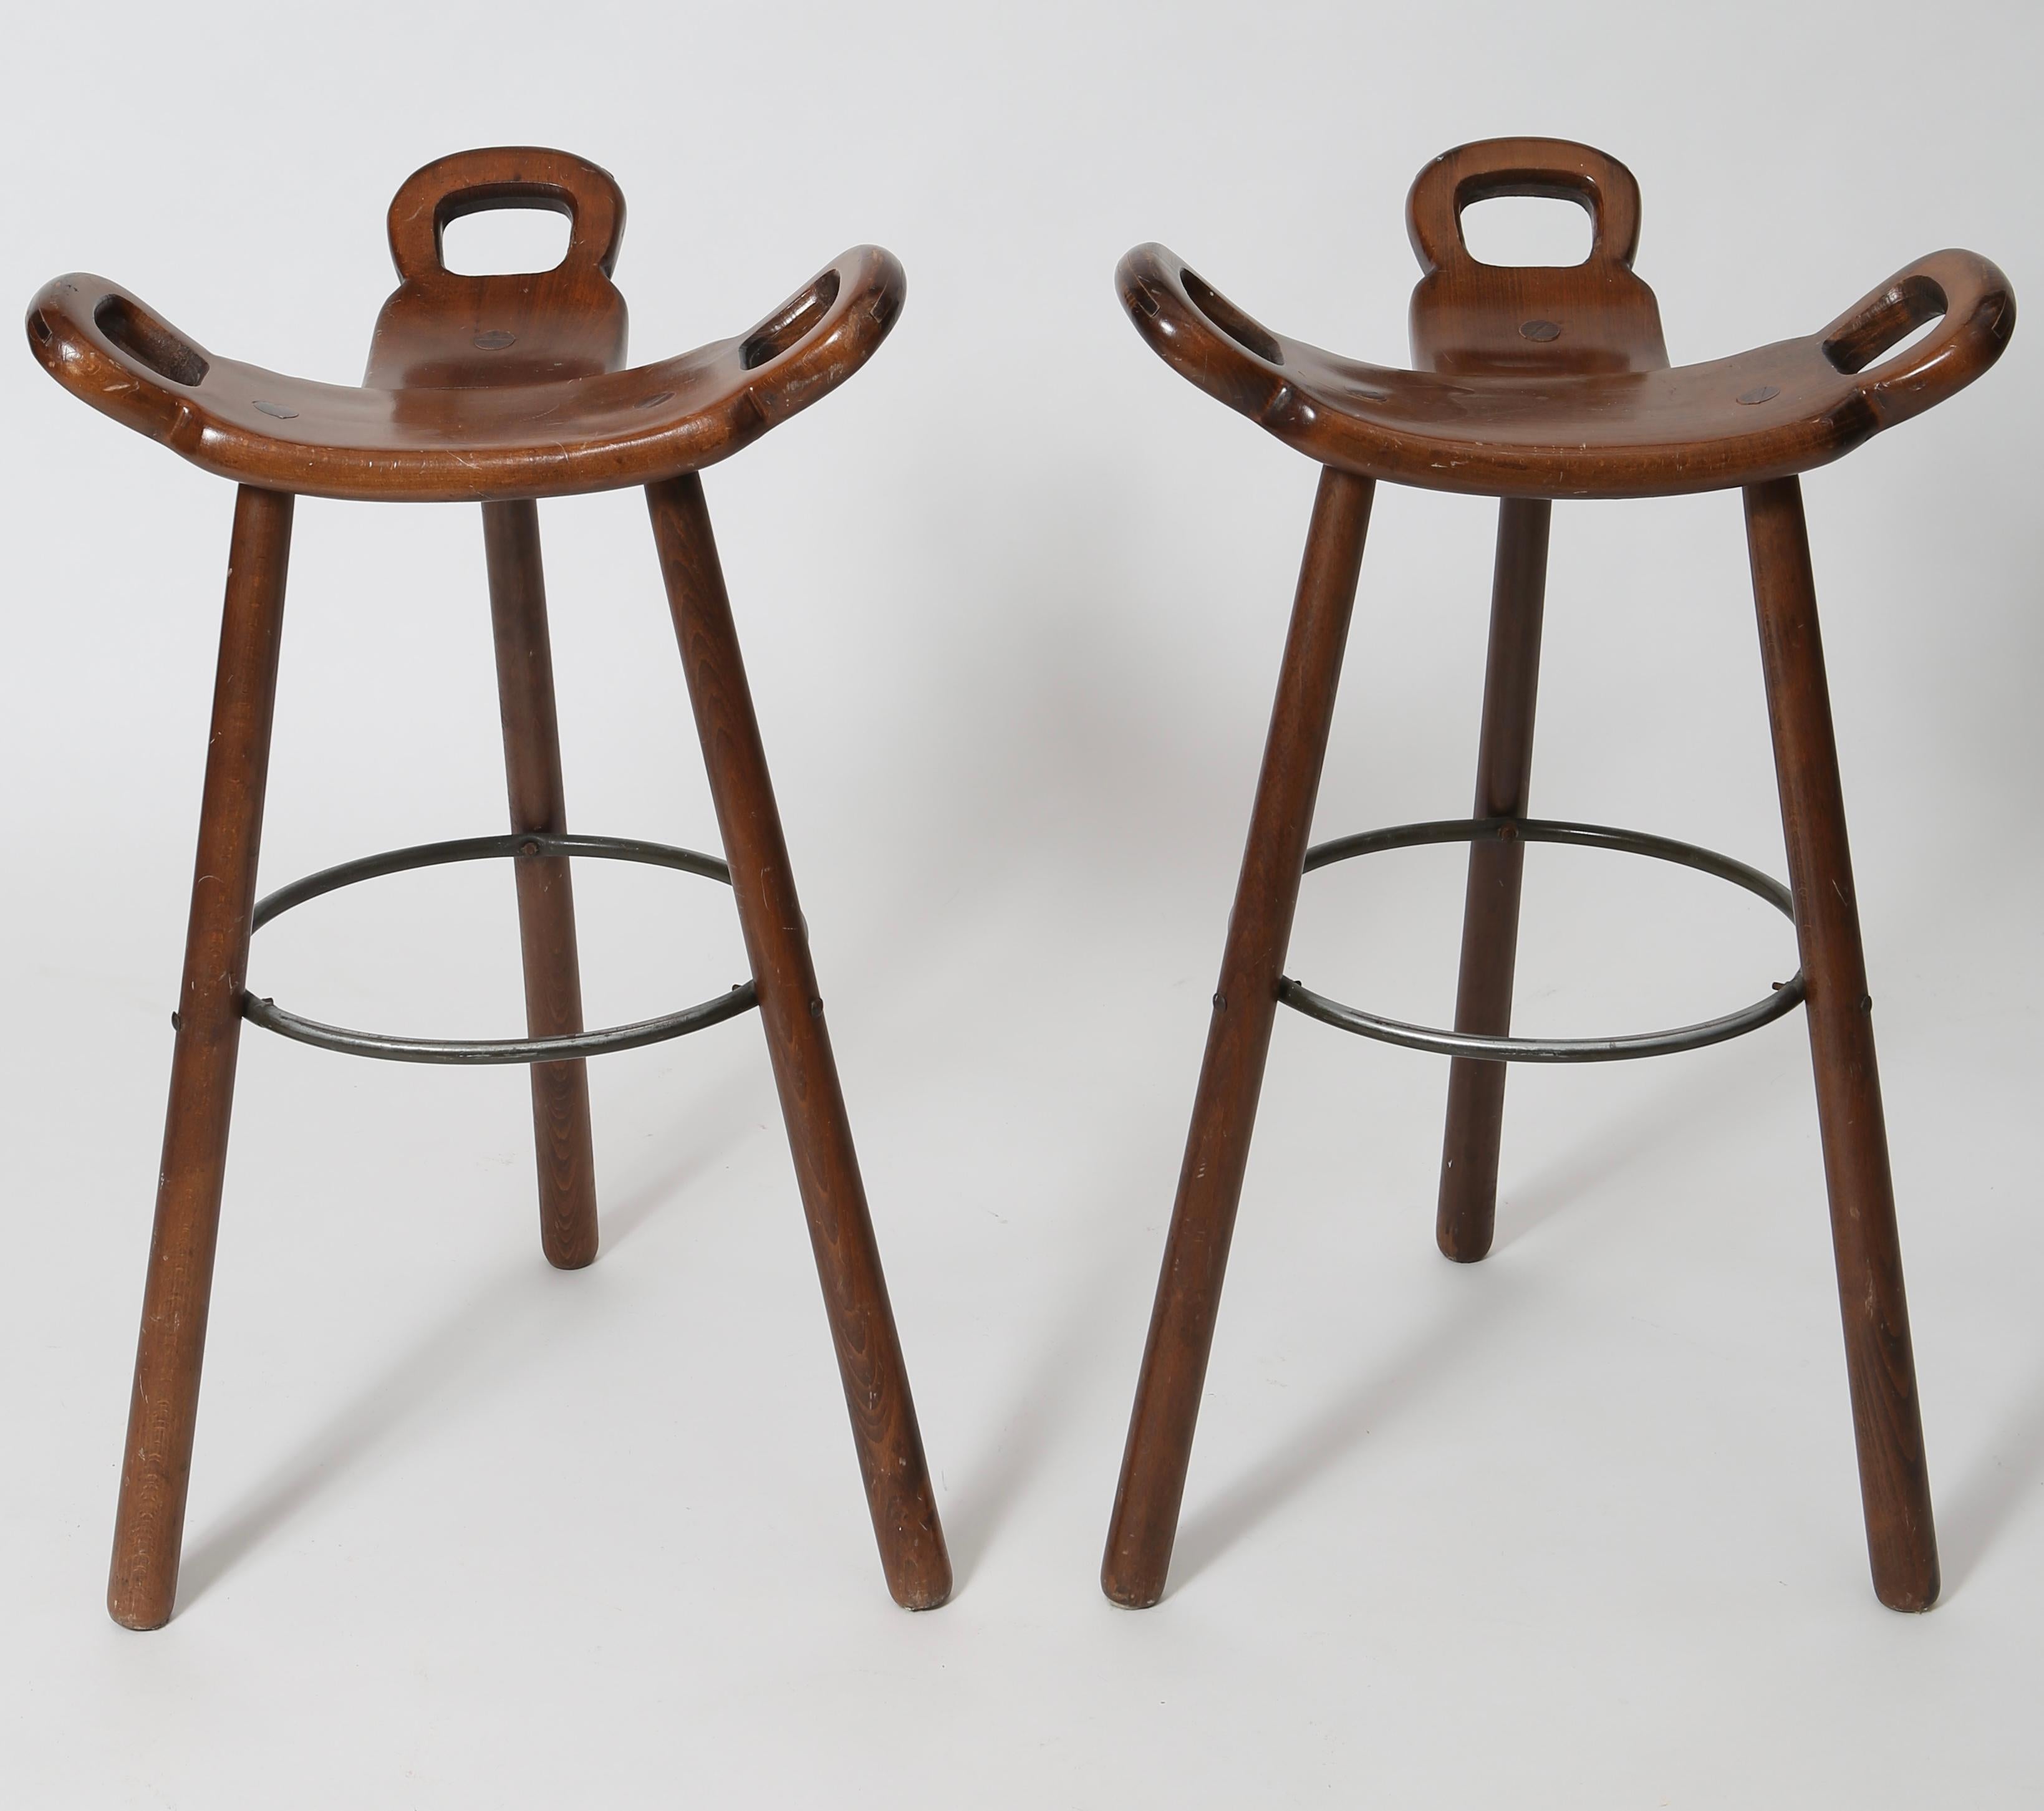 Spanish Midcentury Brutalist Barstools, a Pair In Fair Condition For Sale In Portland, OR